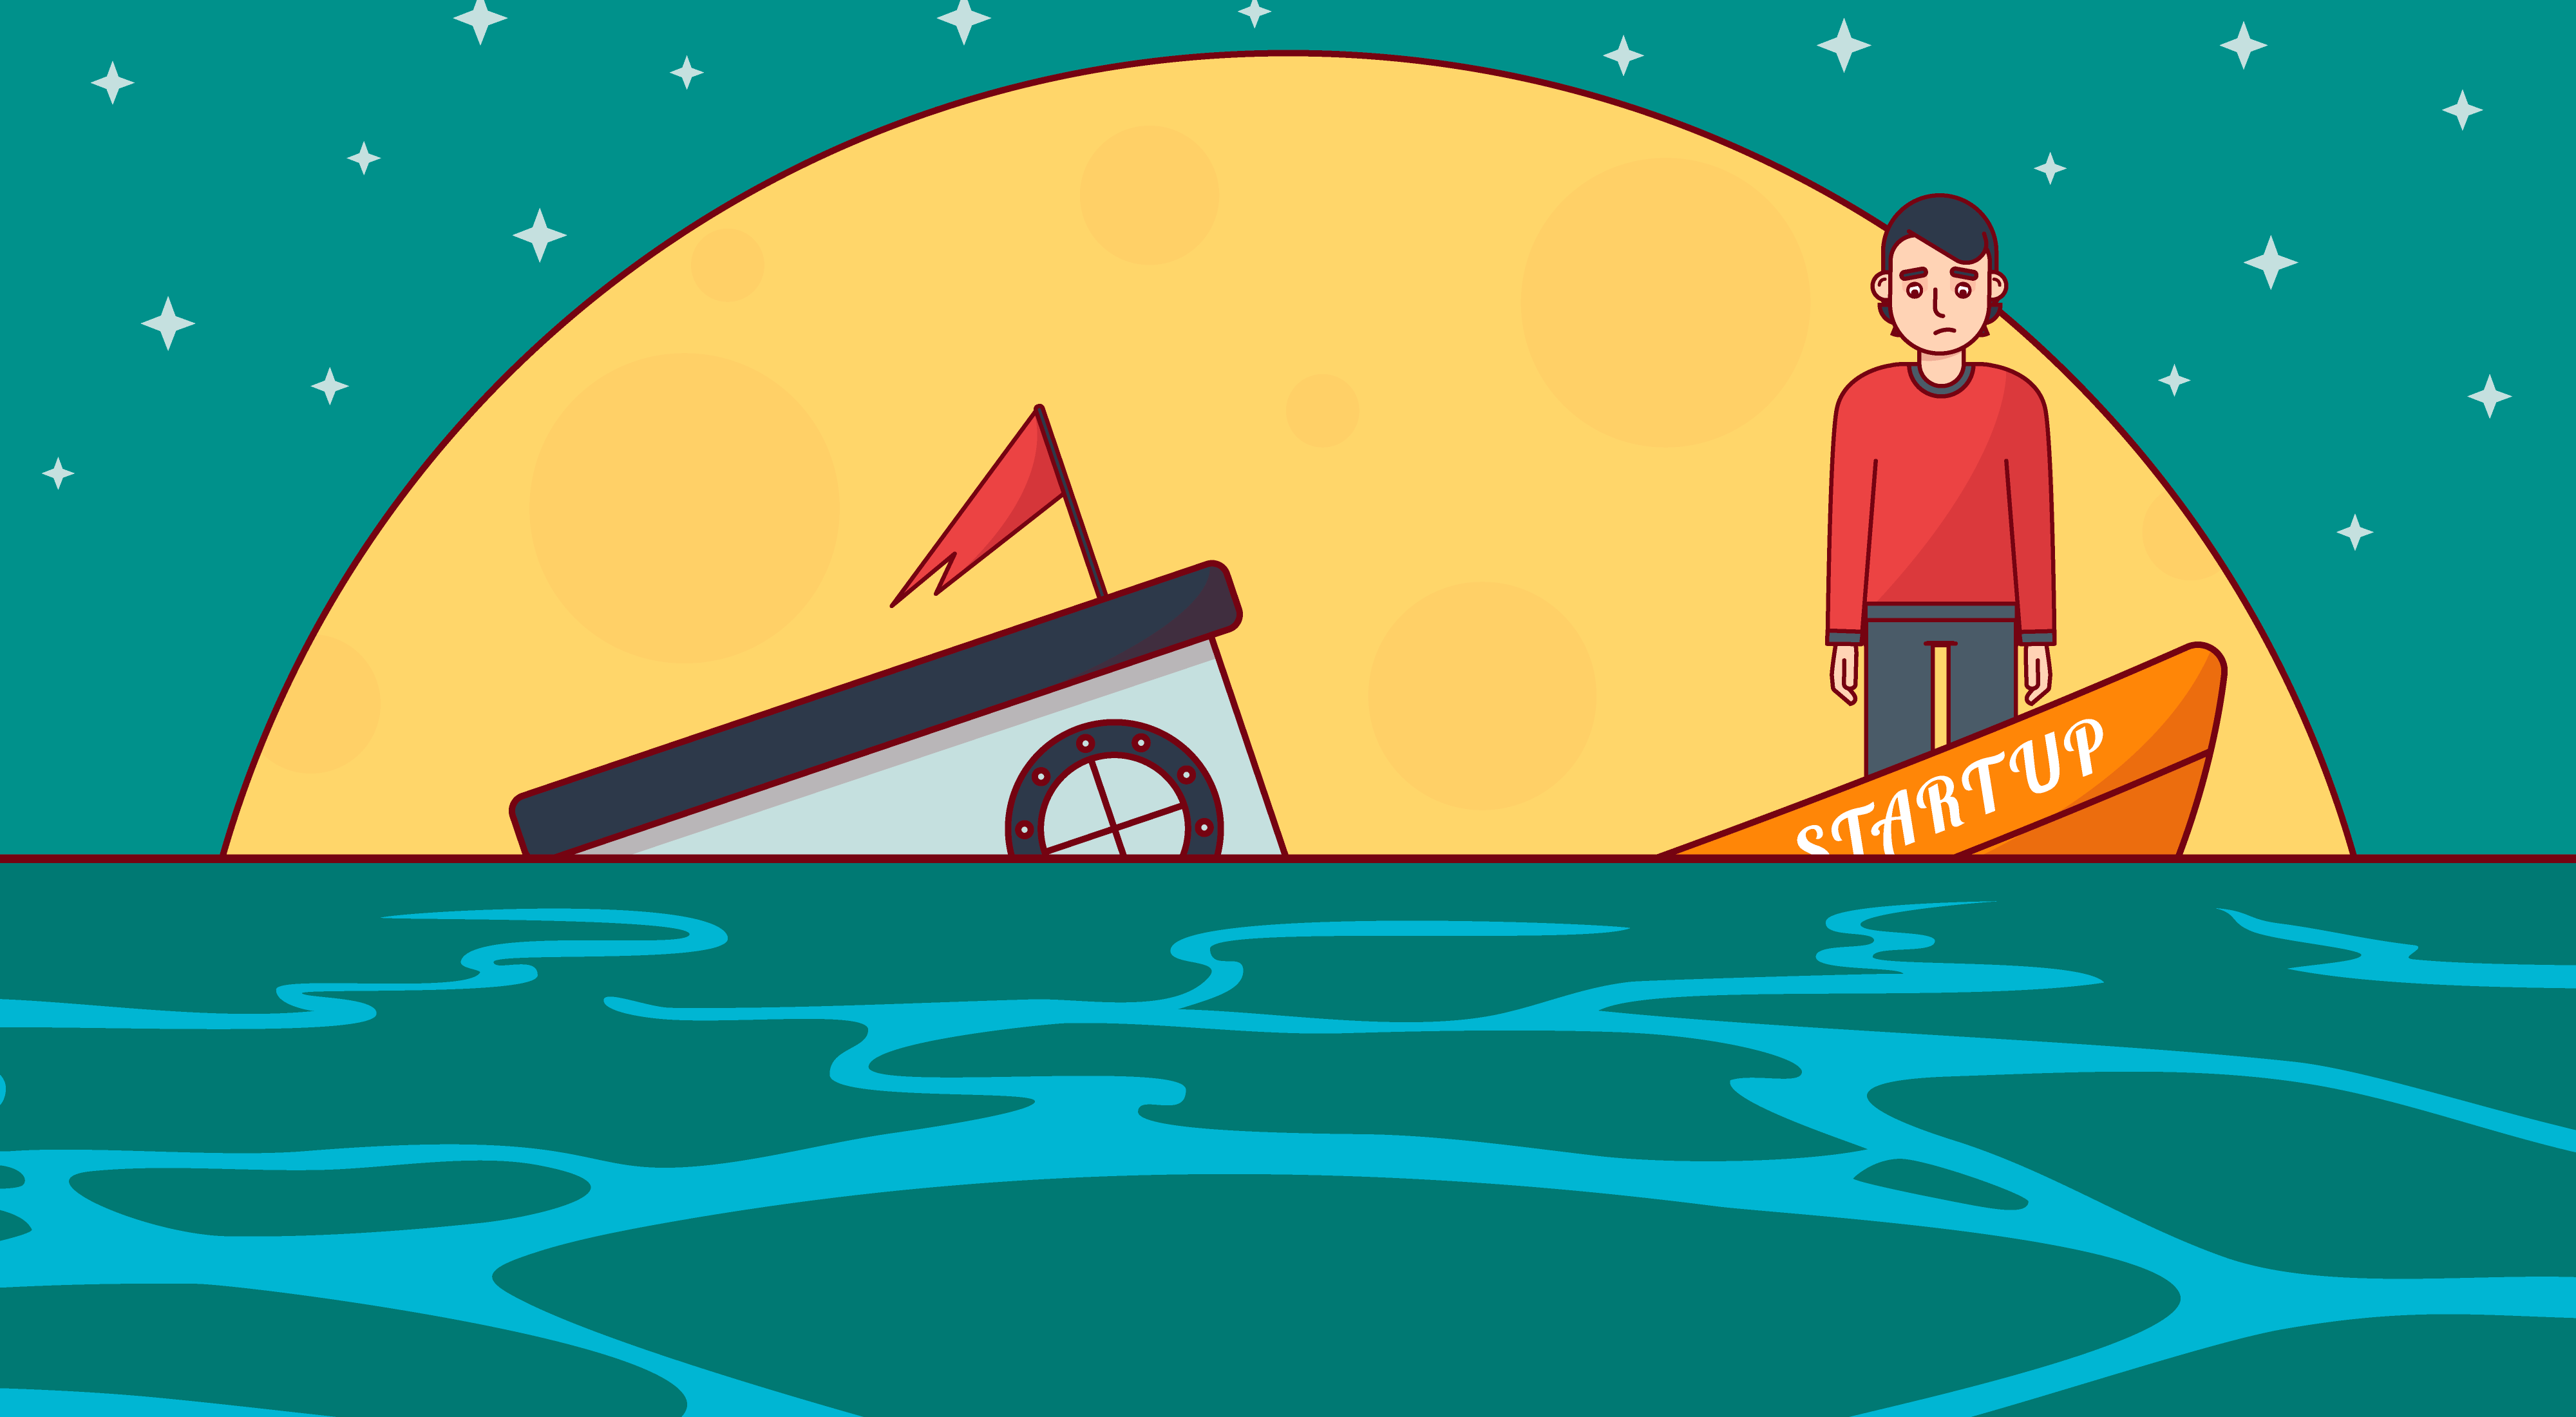 If a Startup Sinks, Founders Go Down With it